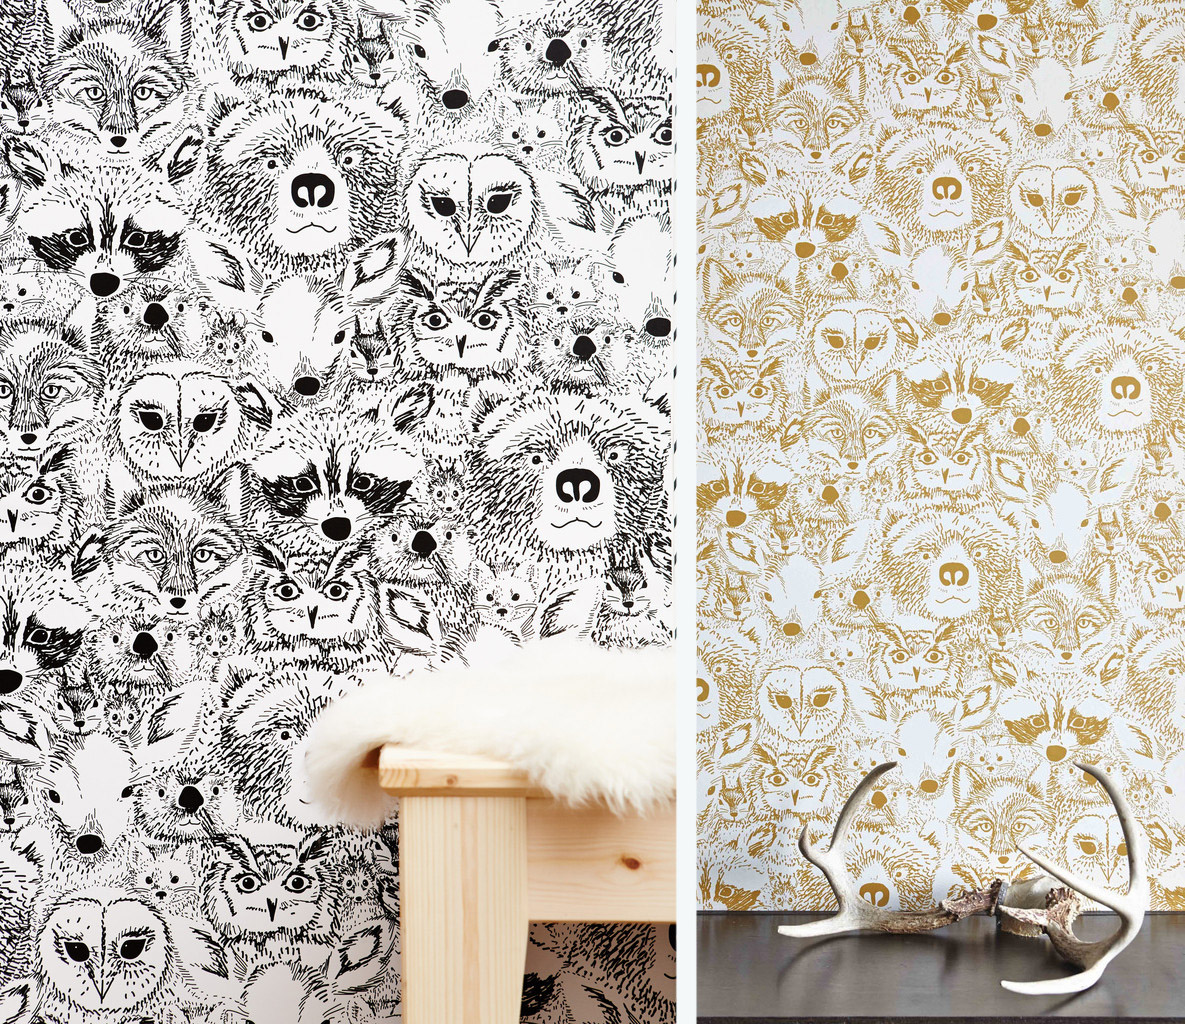 Love at first sight: removable wallpaper